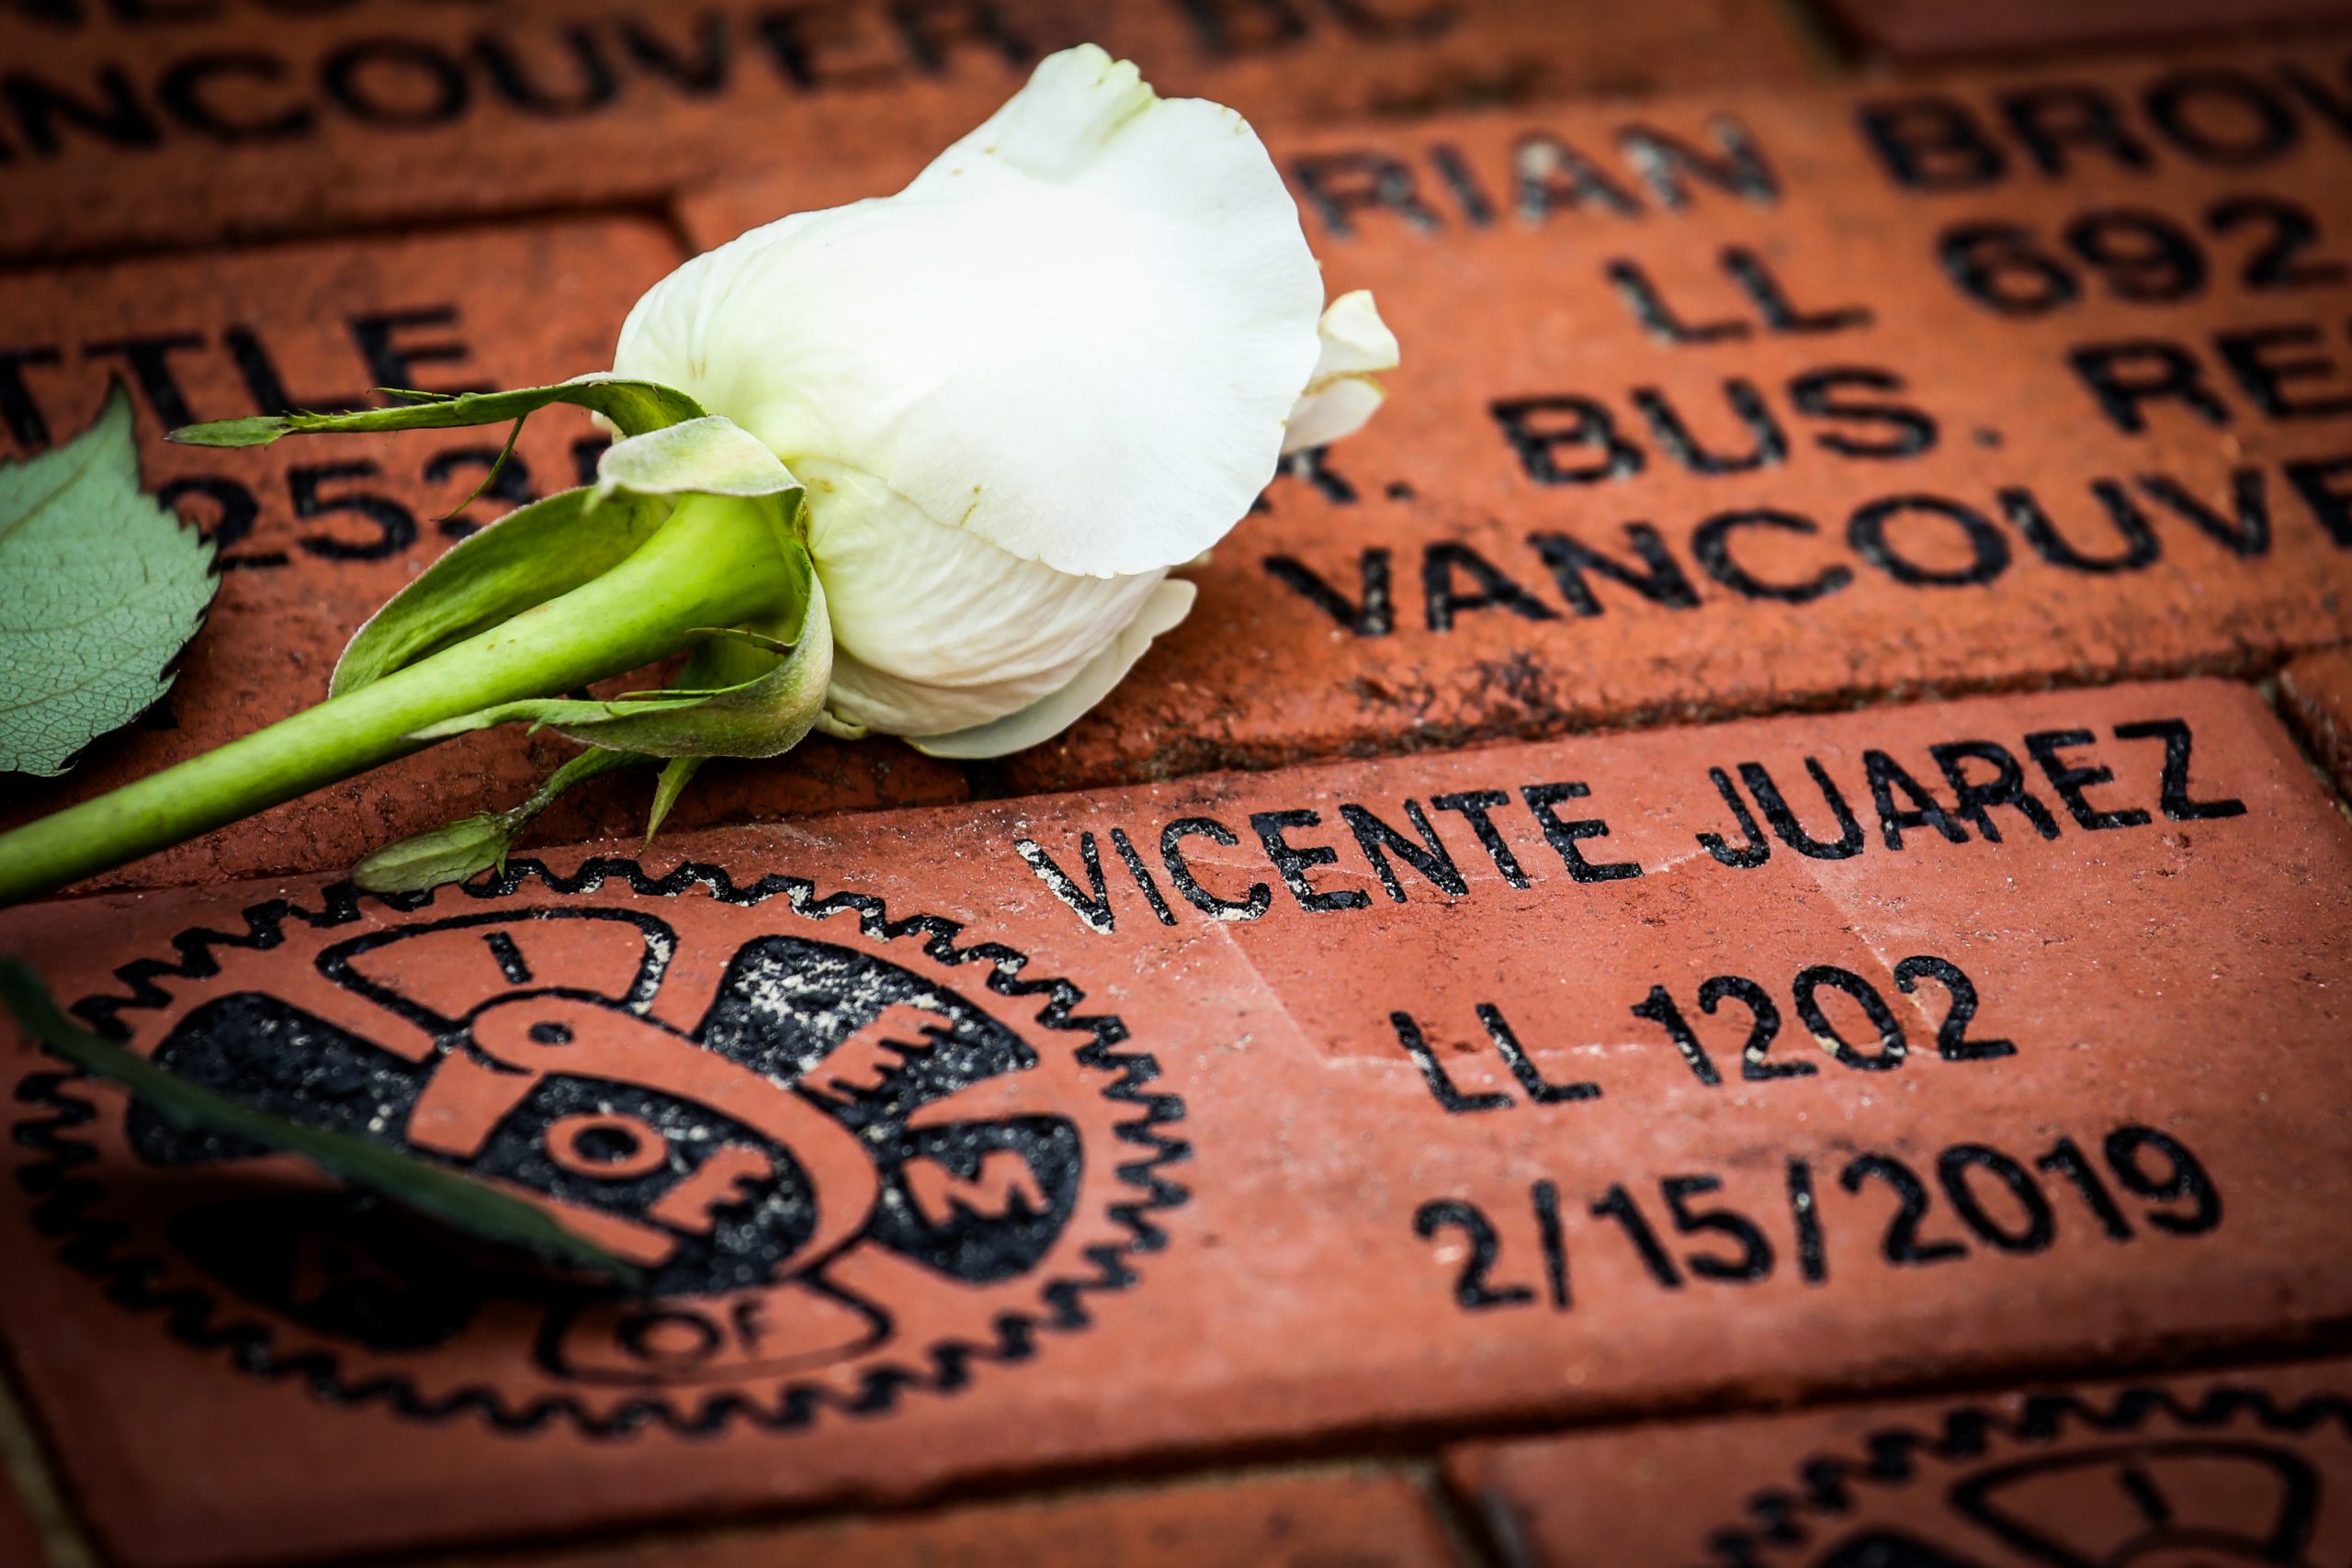 Honor a Fallen Member with a Personalized Brick at the IAM Workers’ Memorial